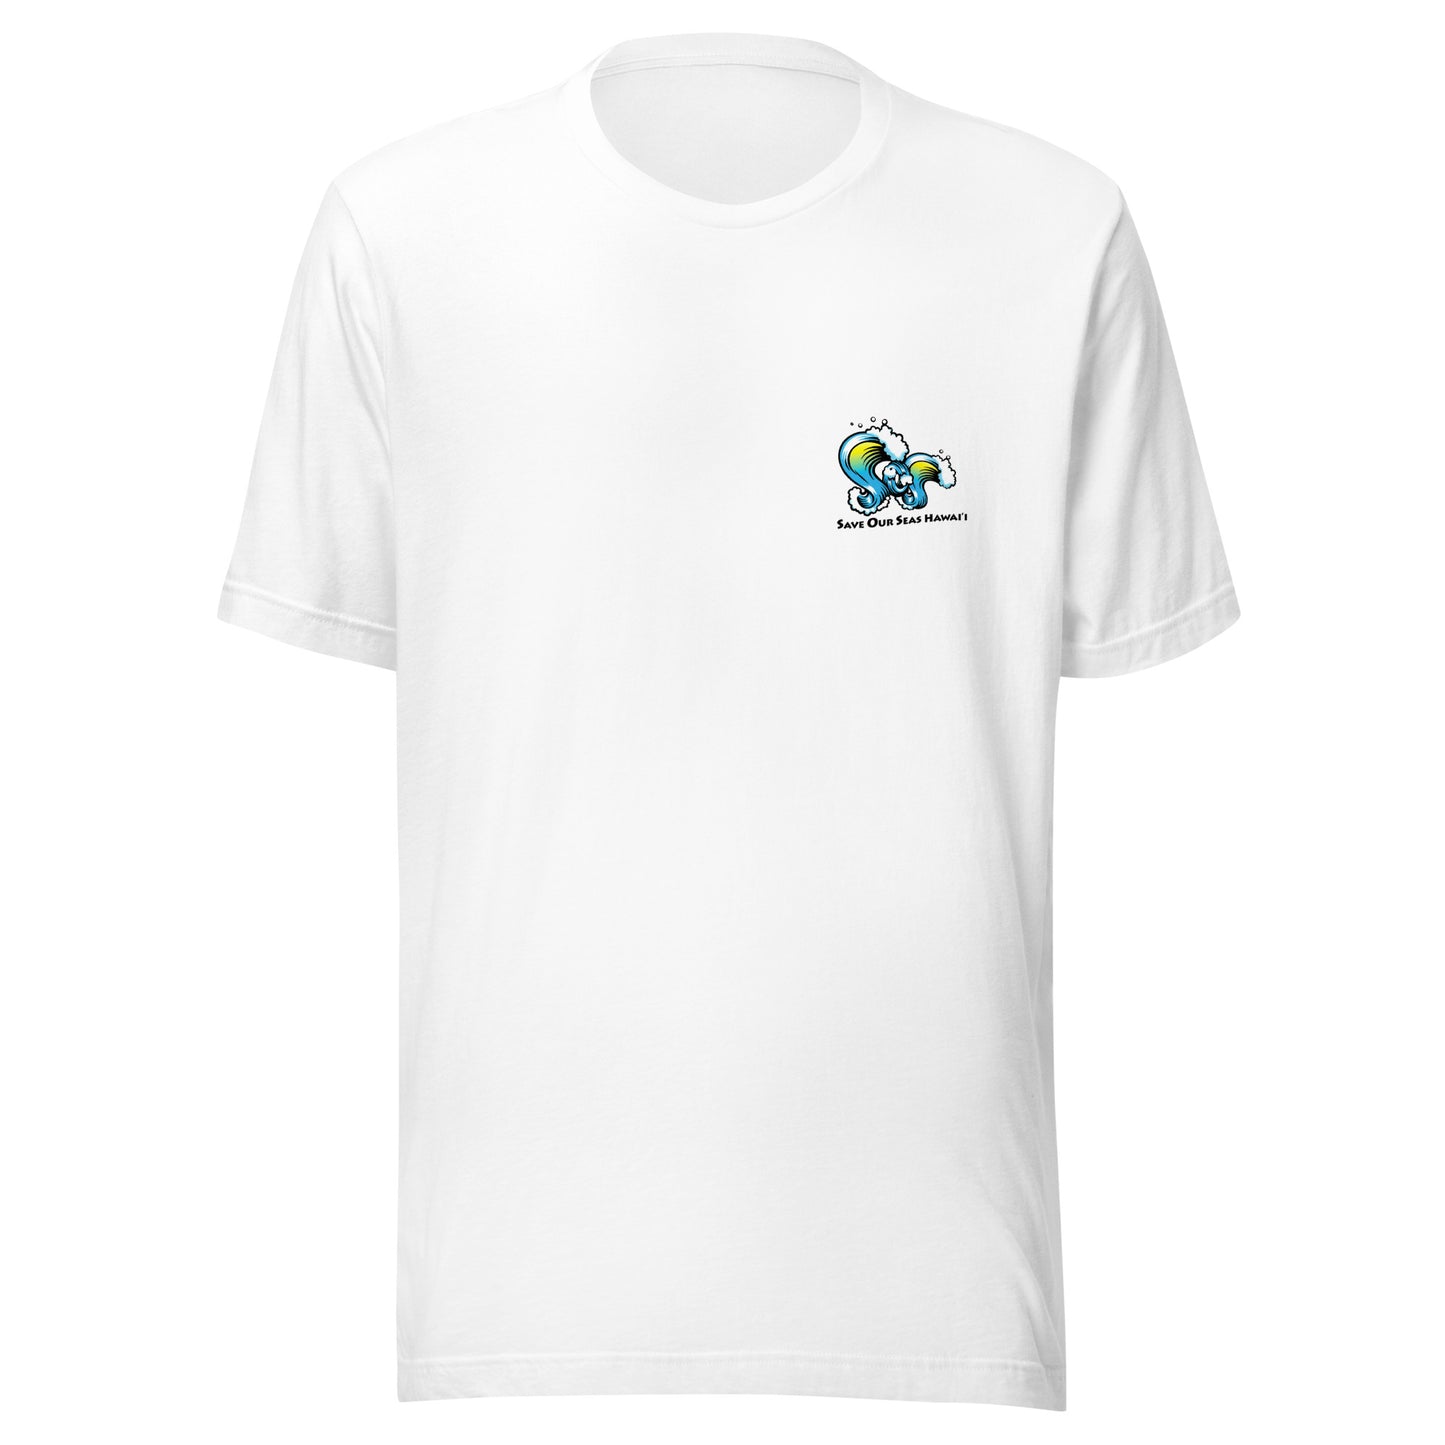 Save Our Seas Hawaii - Tiki Back - SOS Waves front - Unisex t-shirt